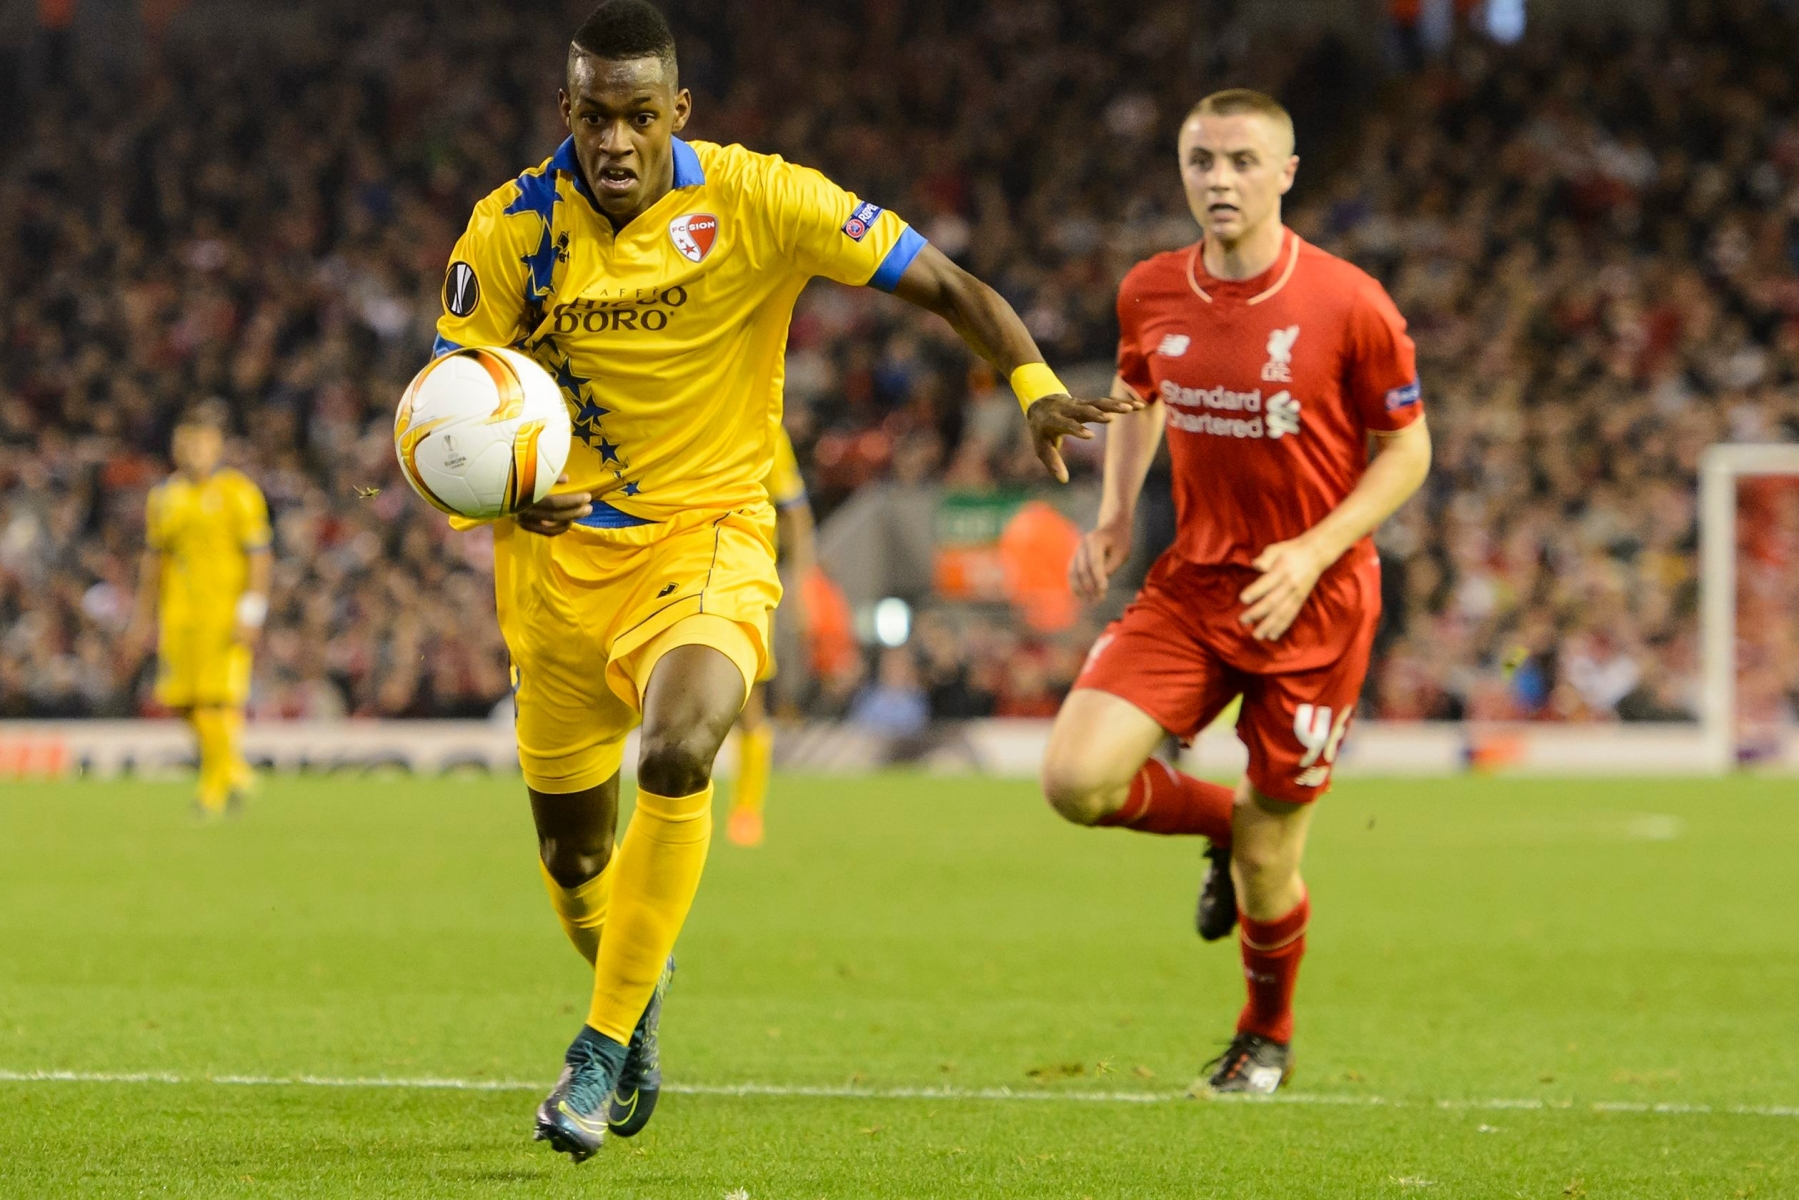 Sion's Edimilson Fernandes, left, challenges for the ball with Liverpool's Jordan Rossiter, right, during the UEFA Europa League group B soccer match between FC Liverpool and FC Sion, at the Anfield stadium, in Liverpool, England, Thursday, October 1, 2015. (KEYSTONE/Jean-Christophe Bott) BRITAIN SOCCER UEFA EUROPA LEAGUE LIVERPOOL SION